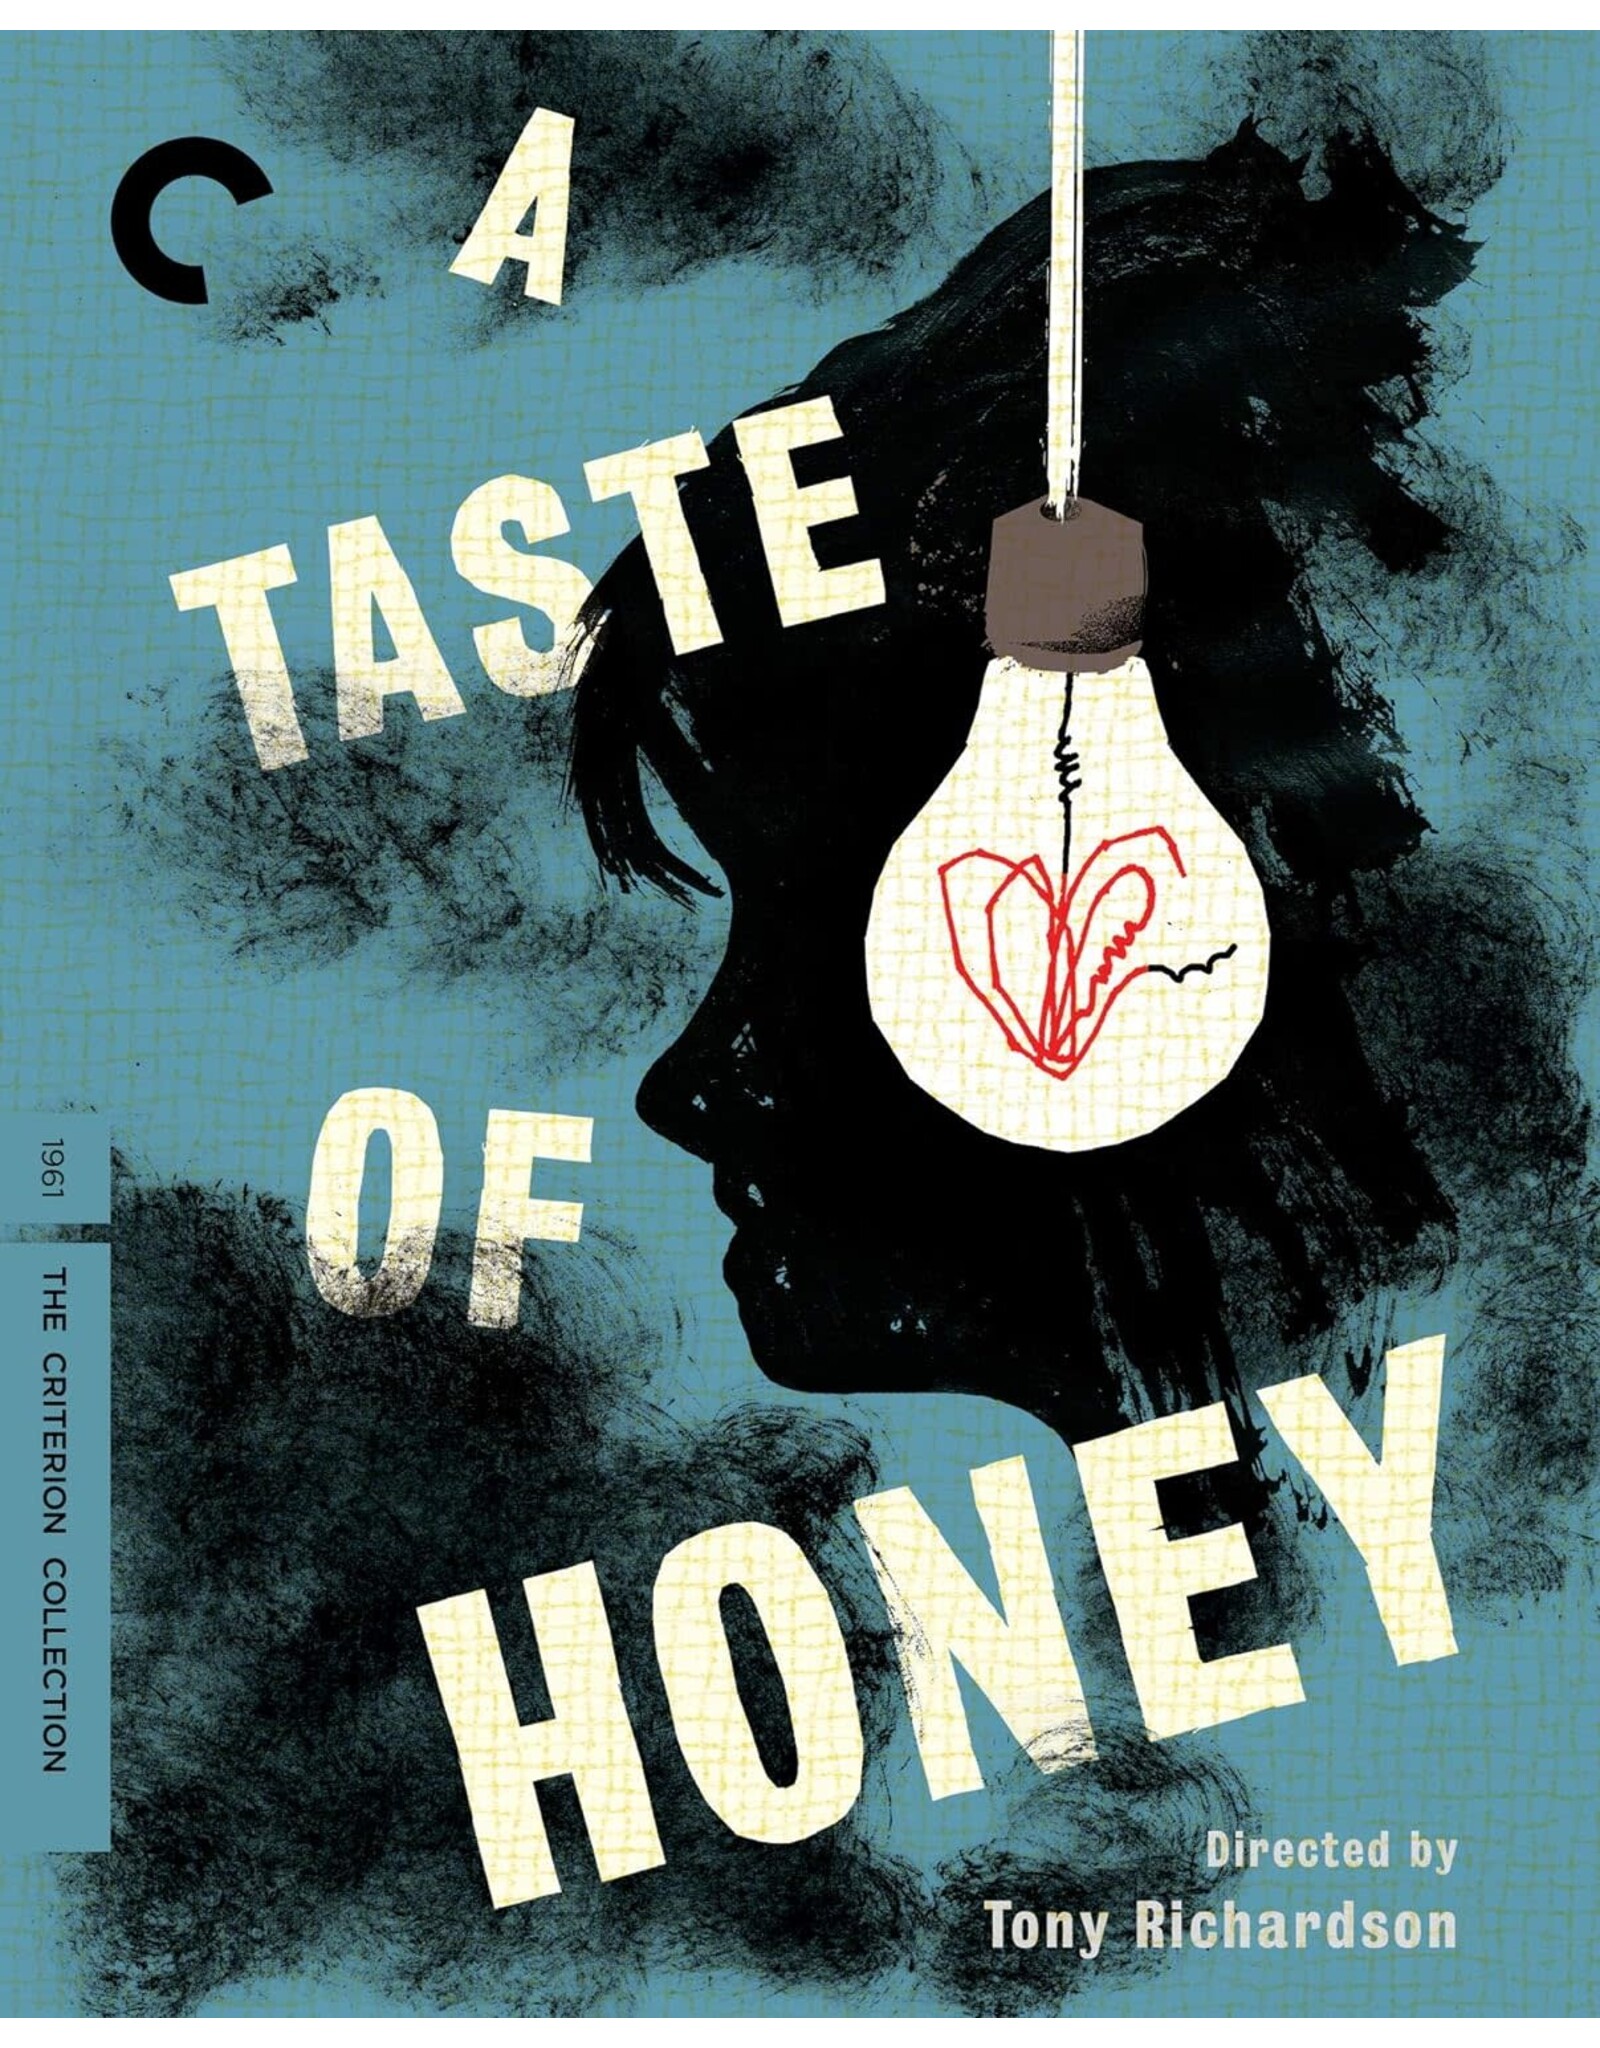 Criterion Collection A Tase of Honey - Criterion Collection (Brand New)